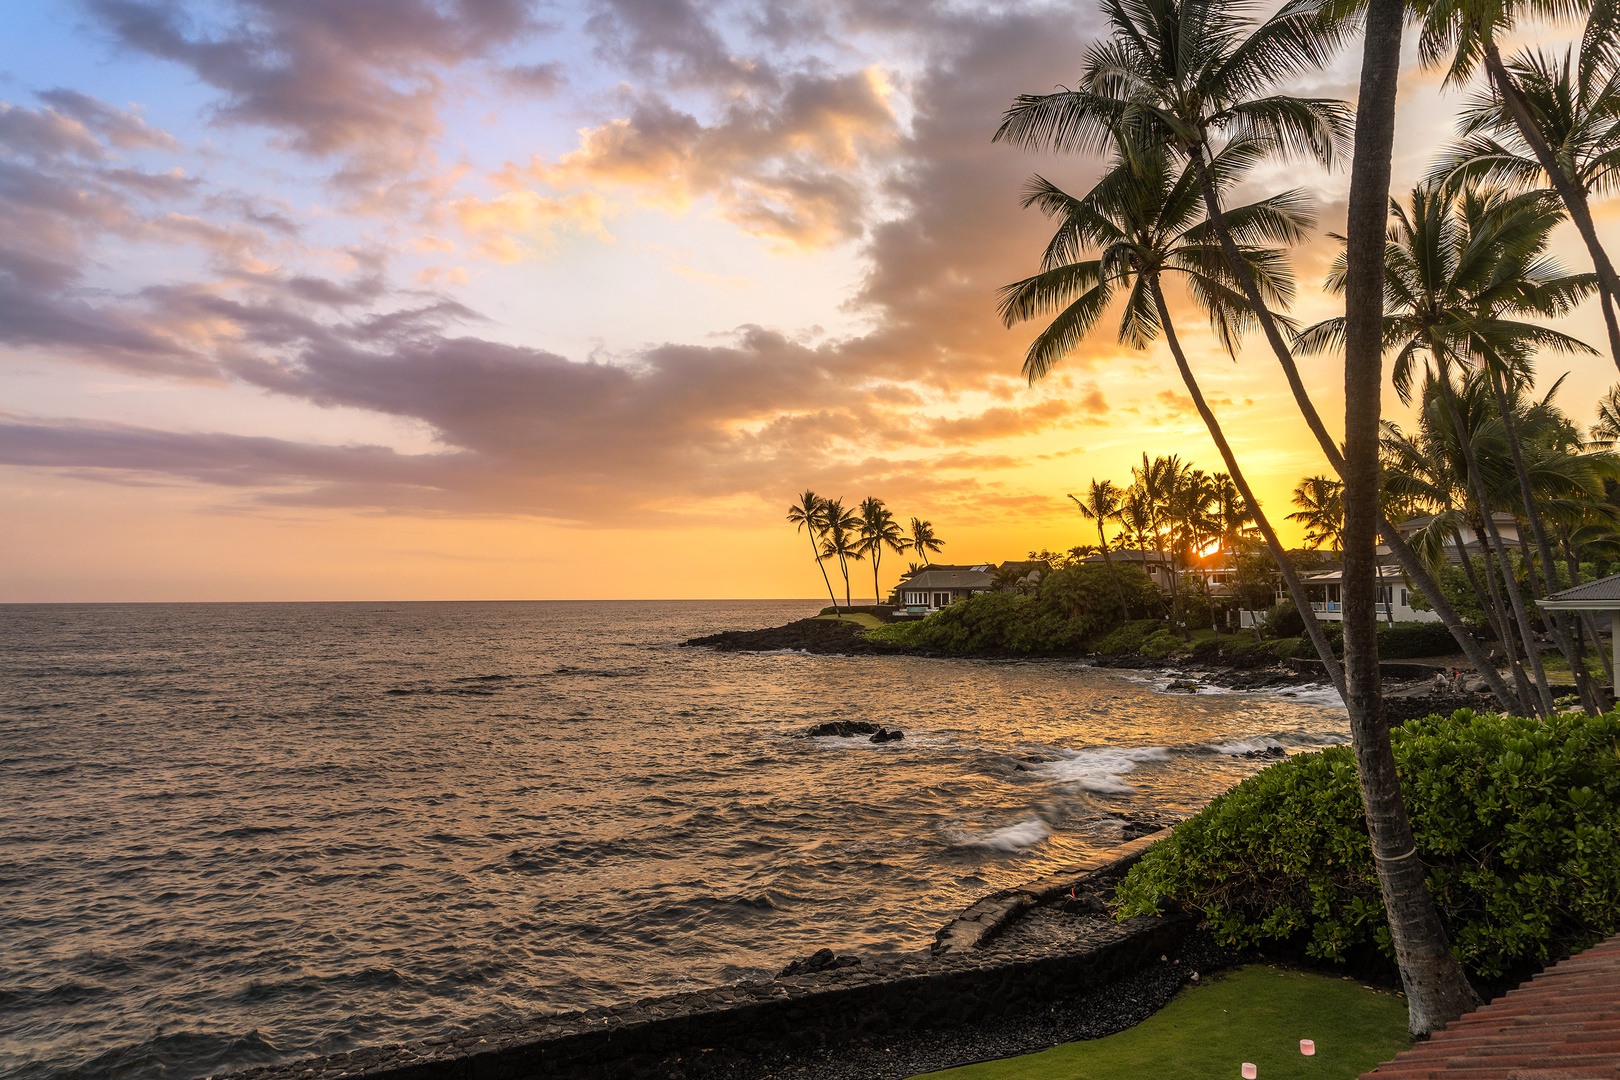 Kailua Kona Vacation Rentals, Hale Pua - Oceanfront Sunset from the yard!